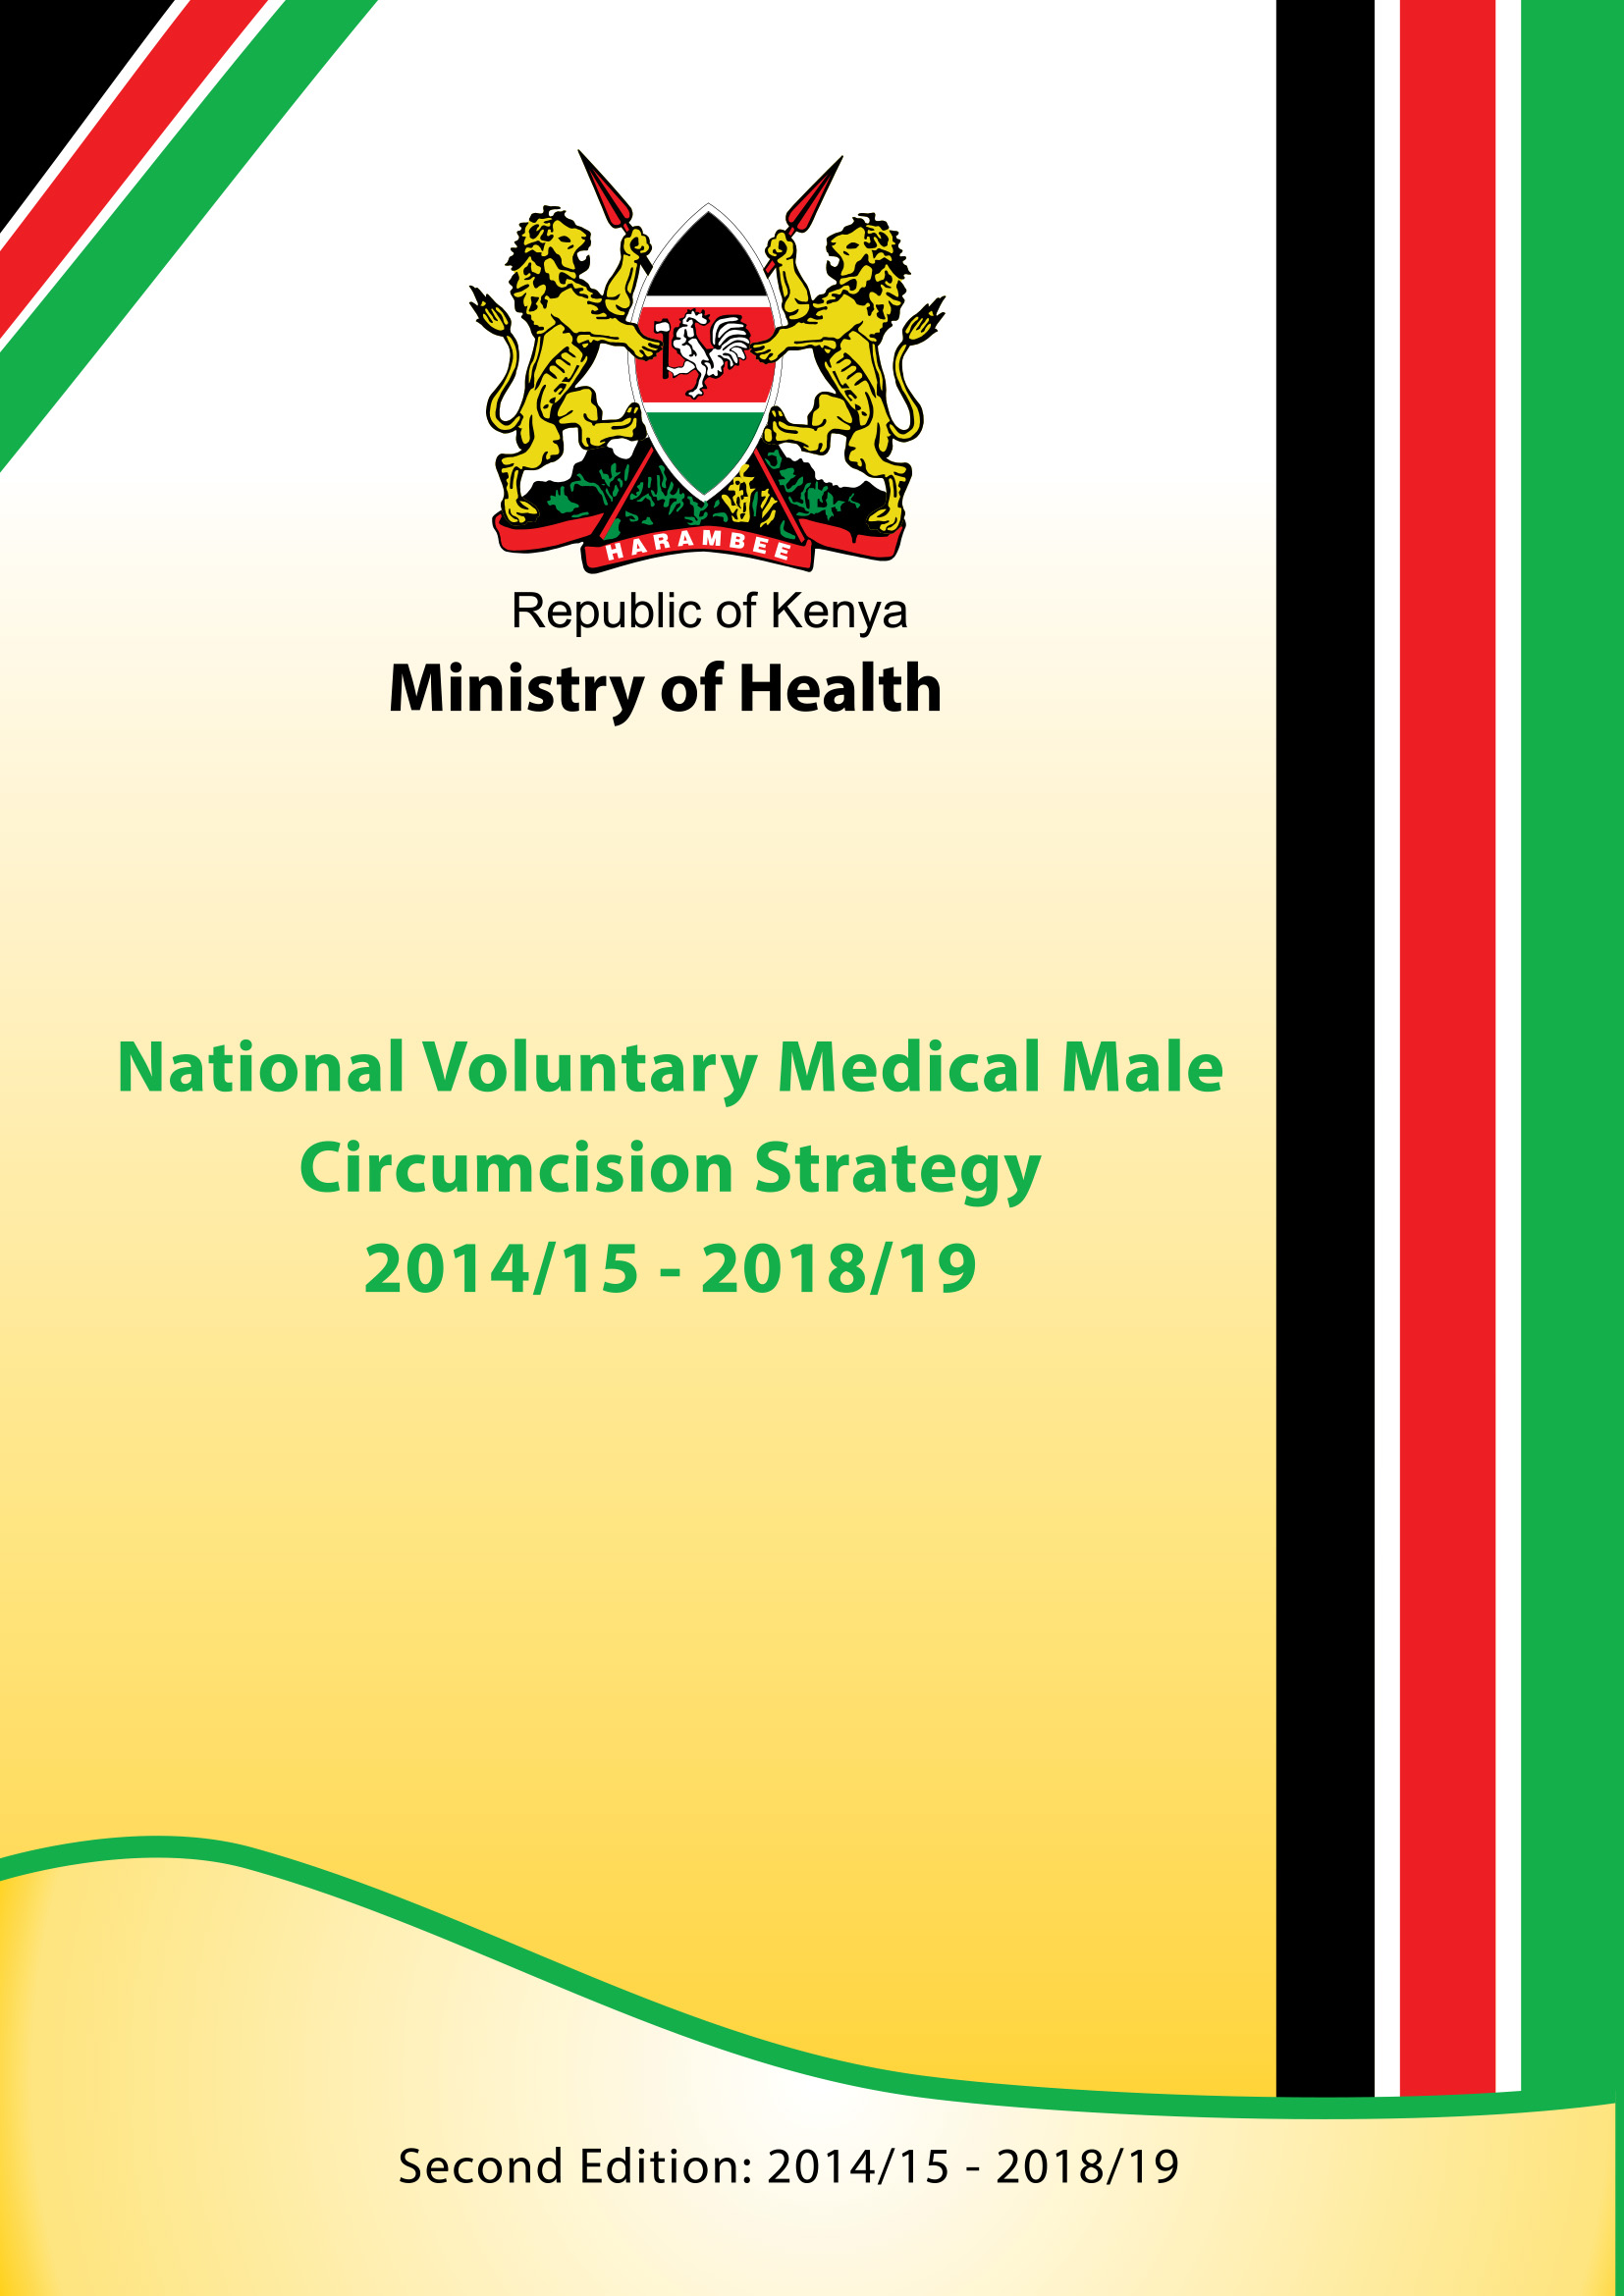 National voluntary medical male circumcision strategy 2014/15-2018/19  